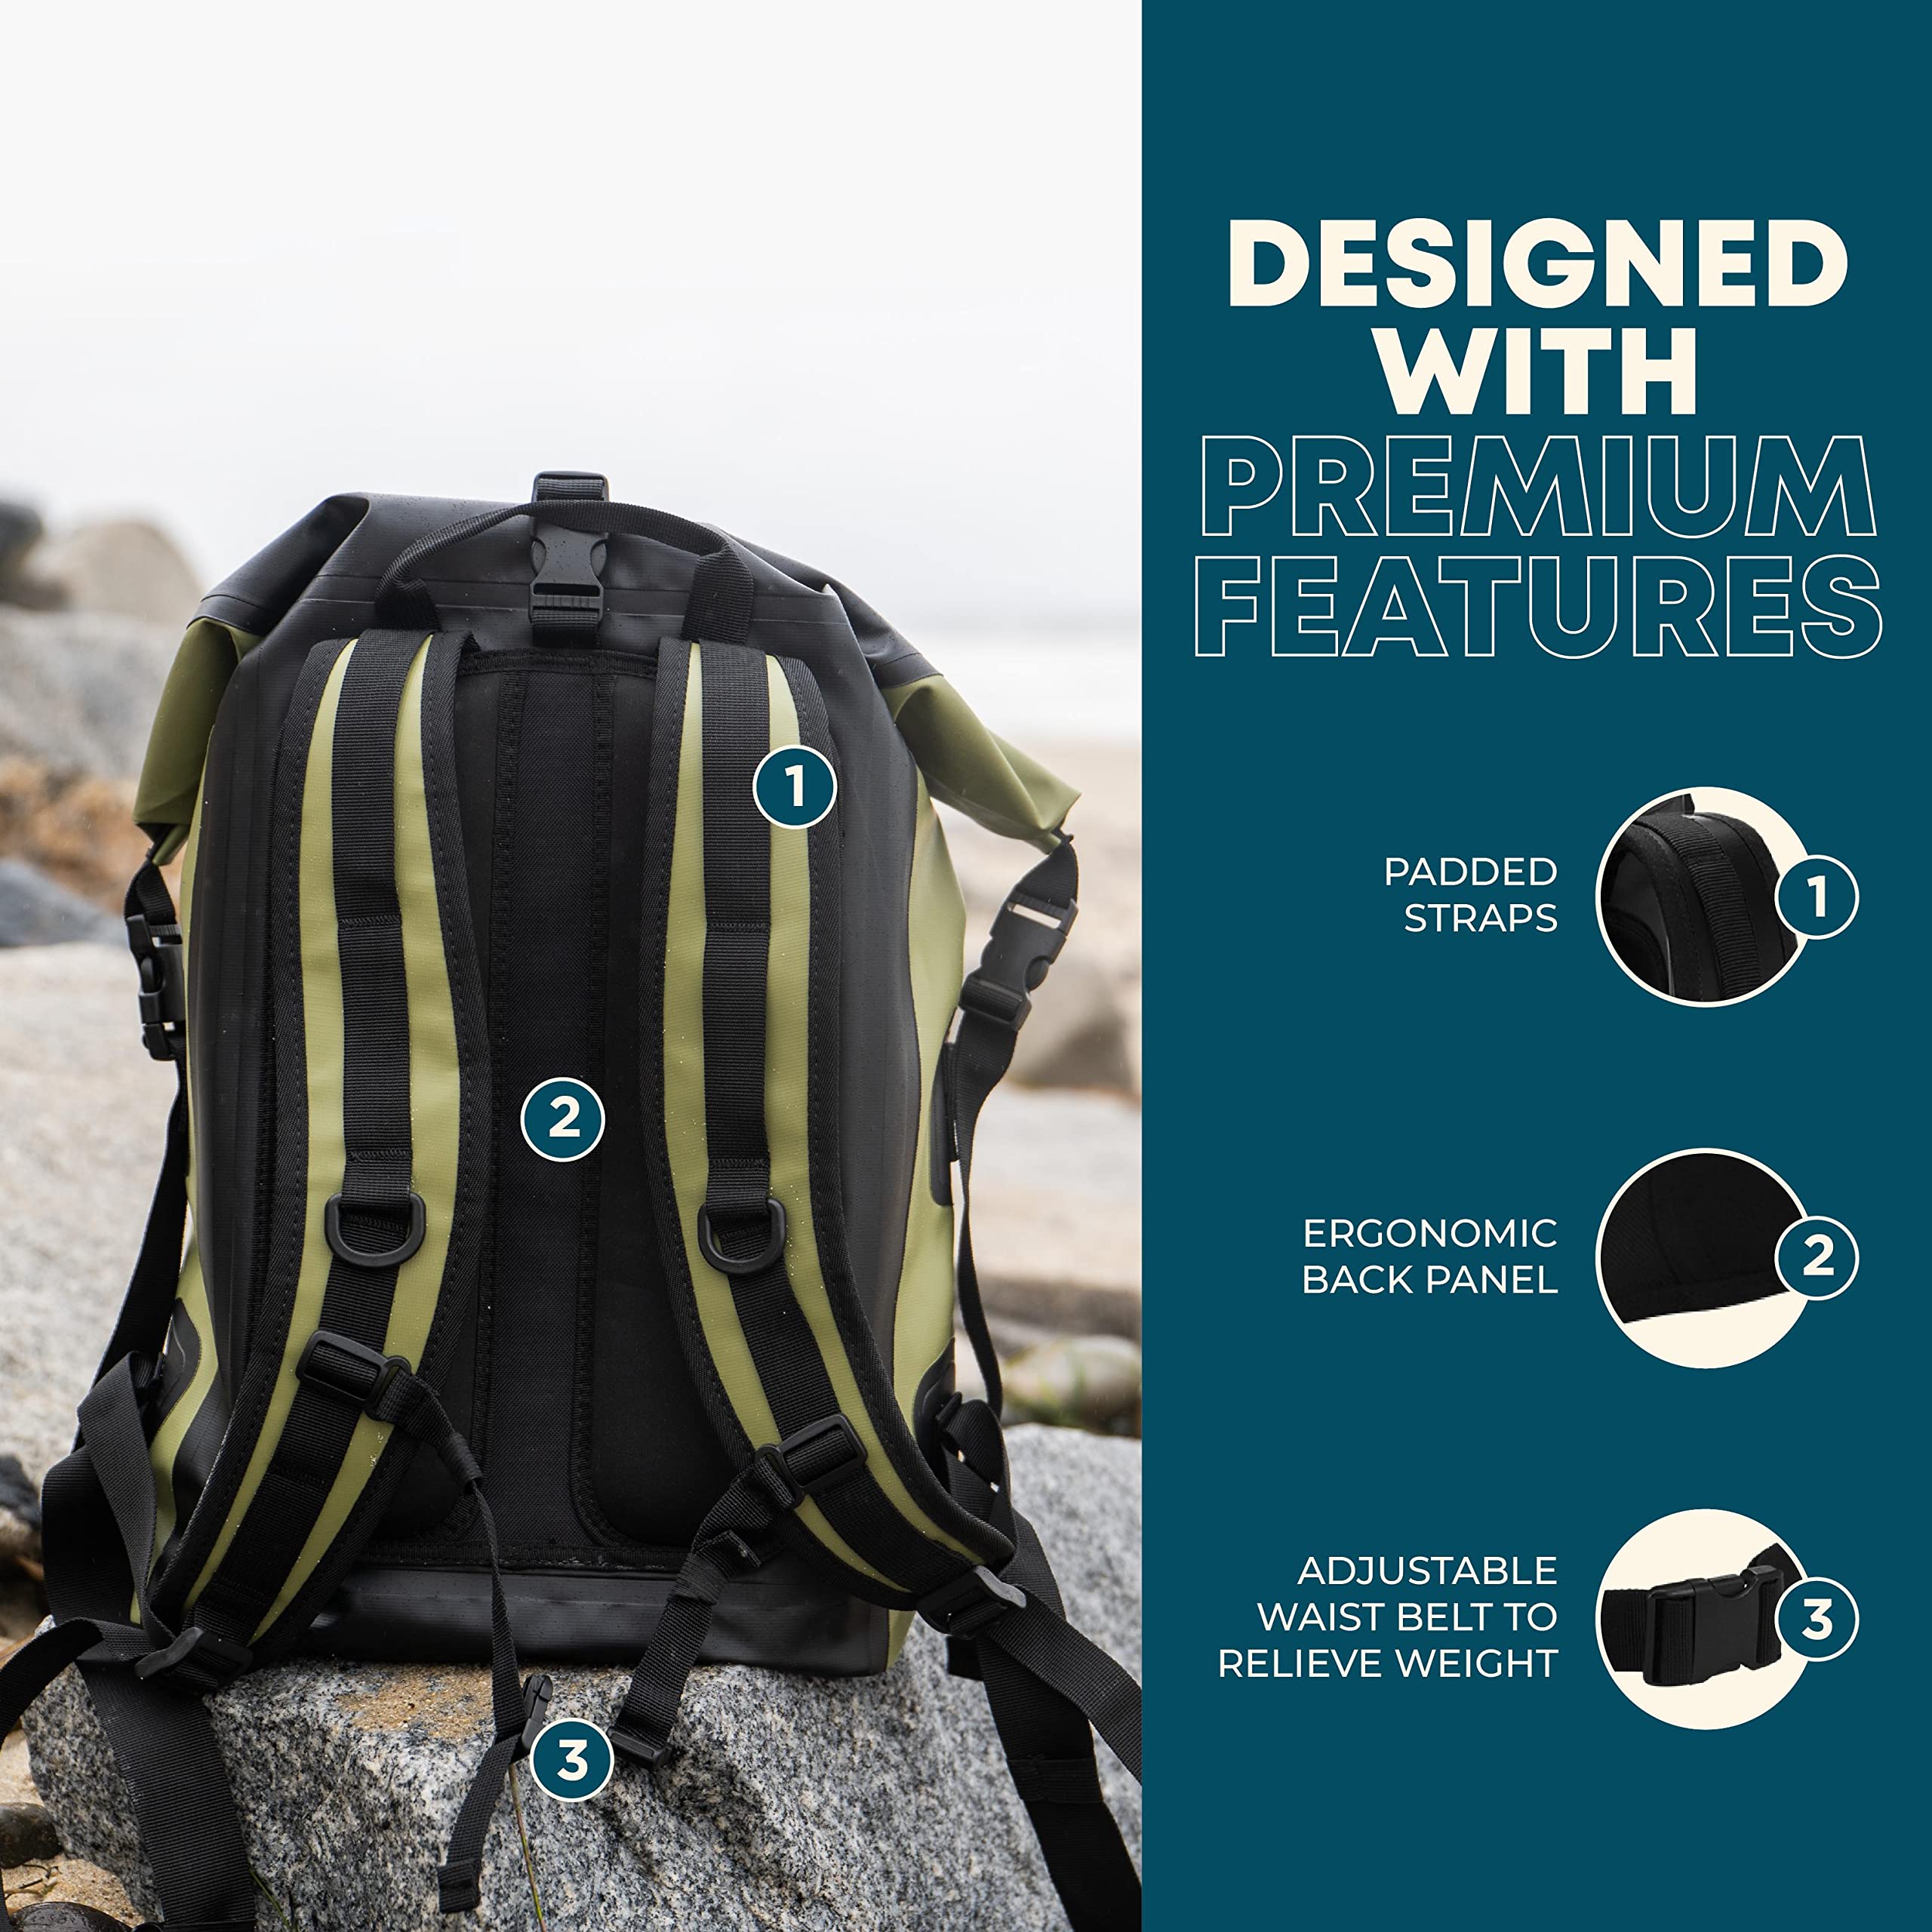 Earth Pak Waterproof Backpack 35L / 55L / 85L sizes with Roll-Top Closure, Front Pocket, Cushioned Back Panel & Phone Case